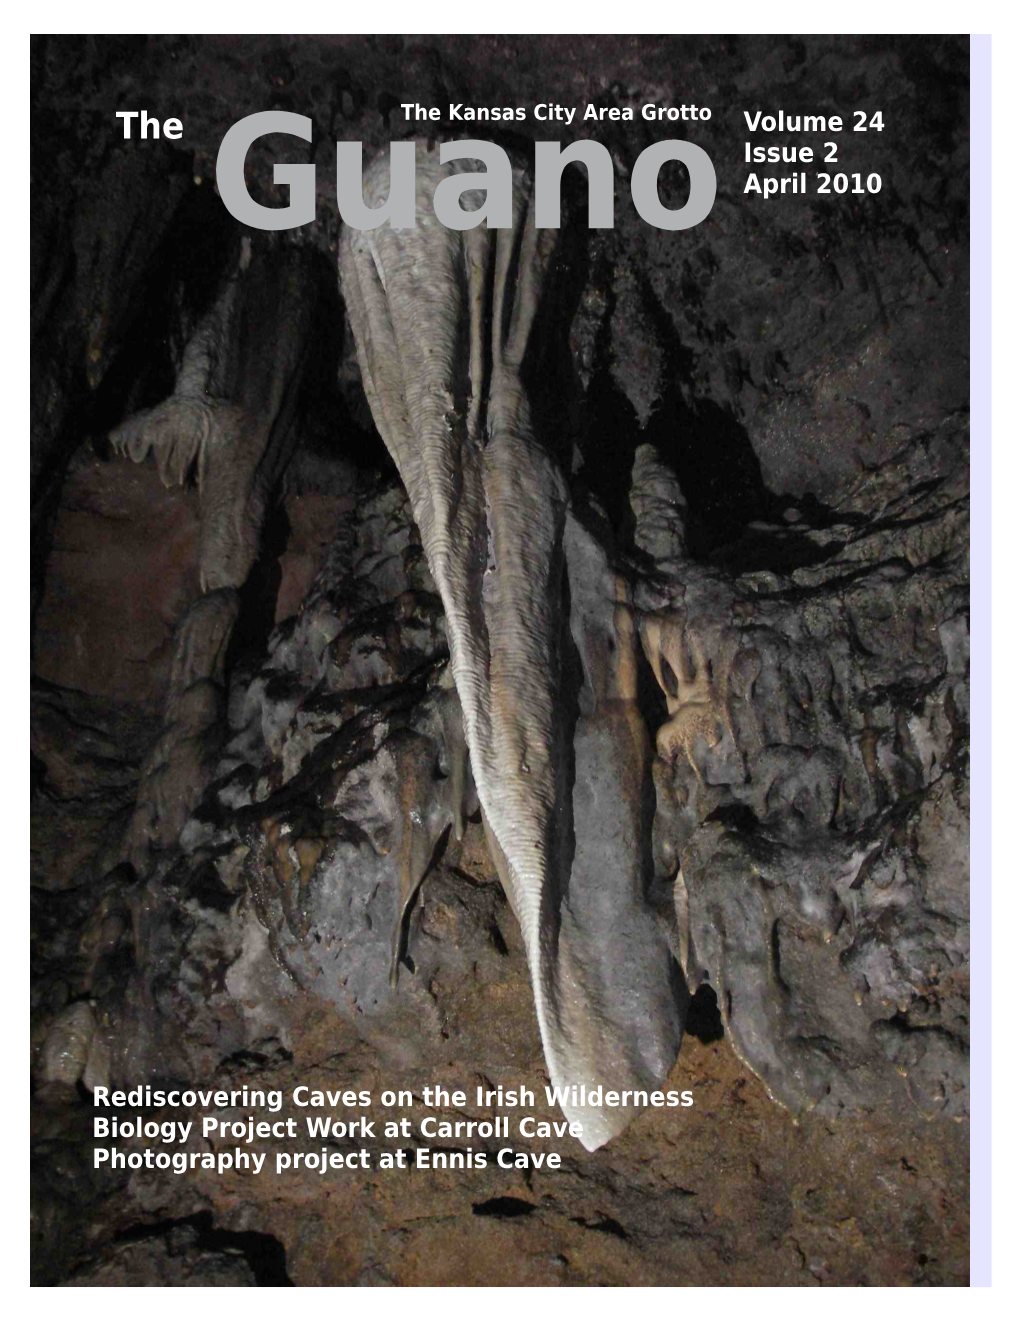 Volume 24 Issue 2 April 2010 Rediscovering Caves on the Irish